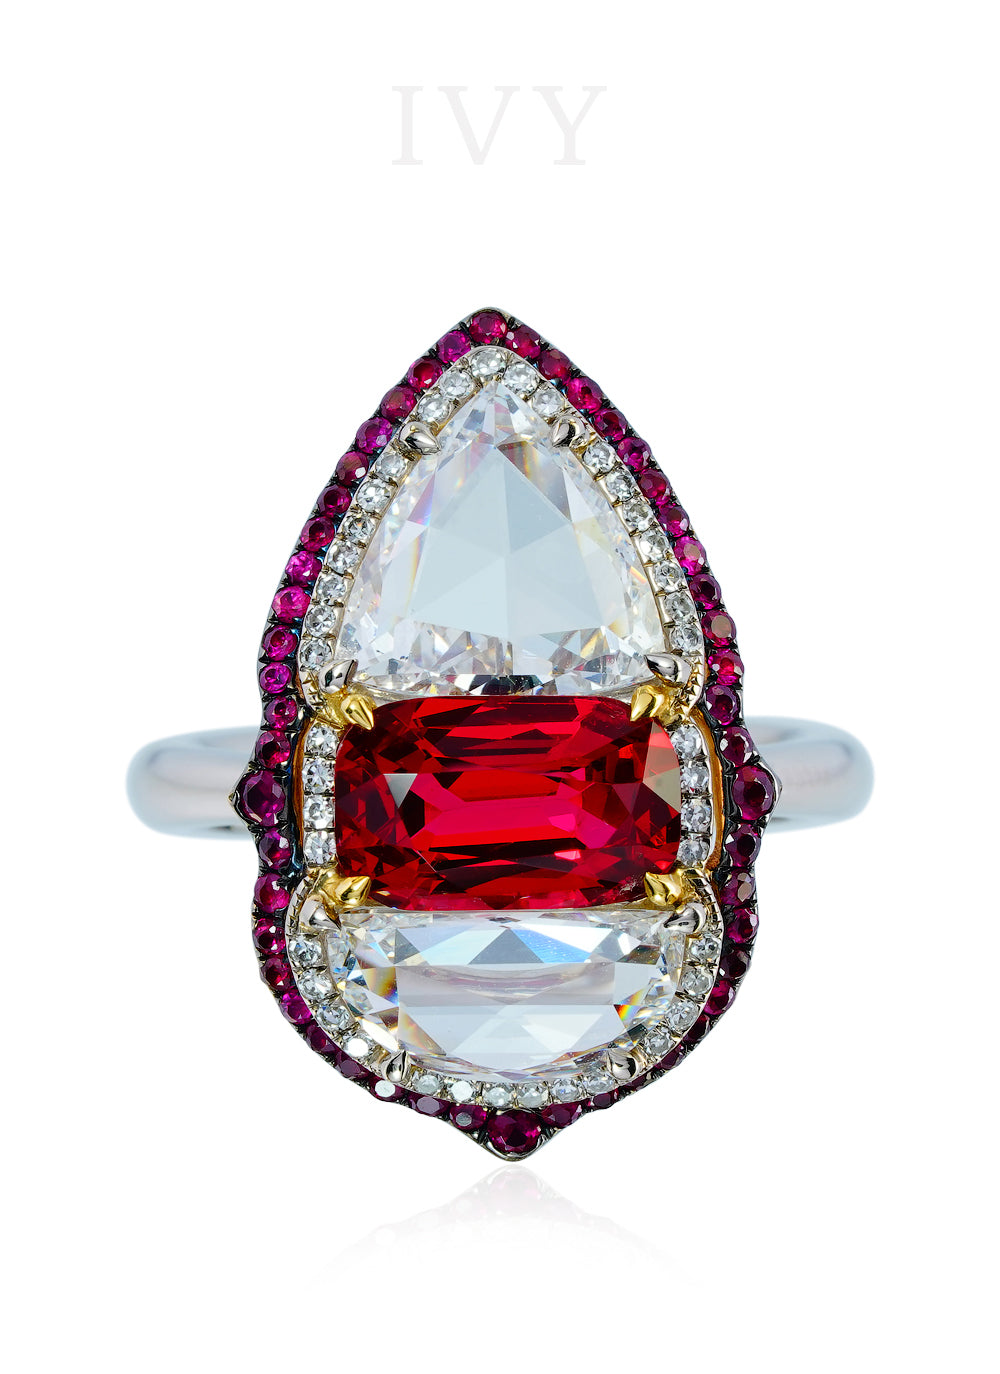 Red Spinel and Diamond Ring